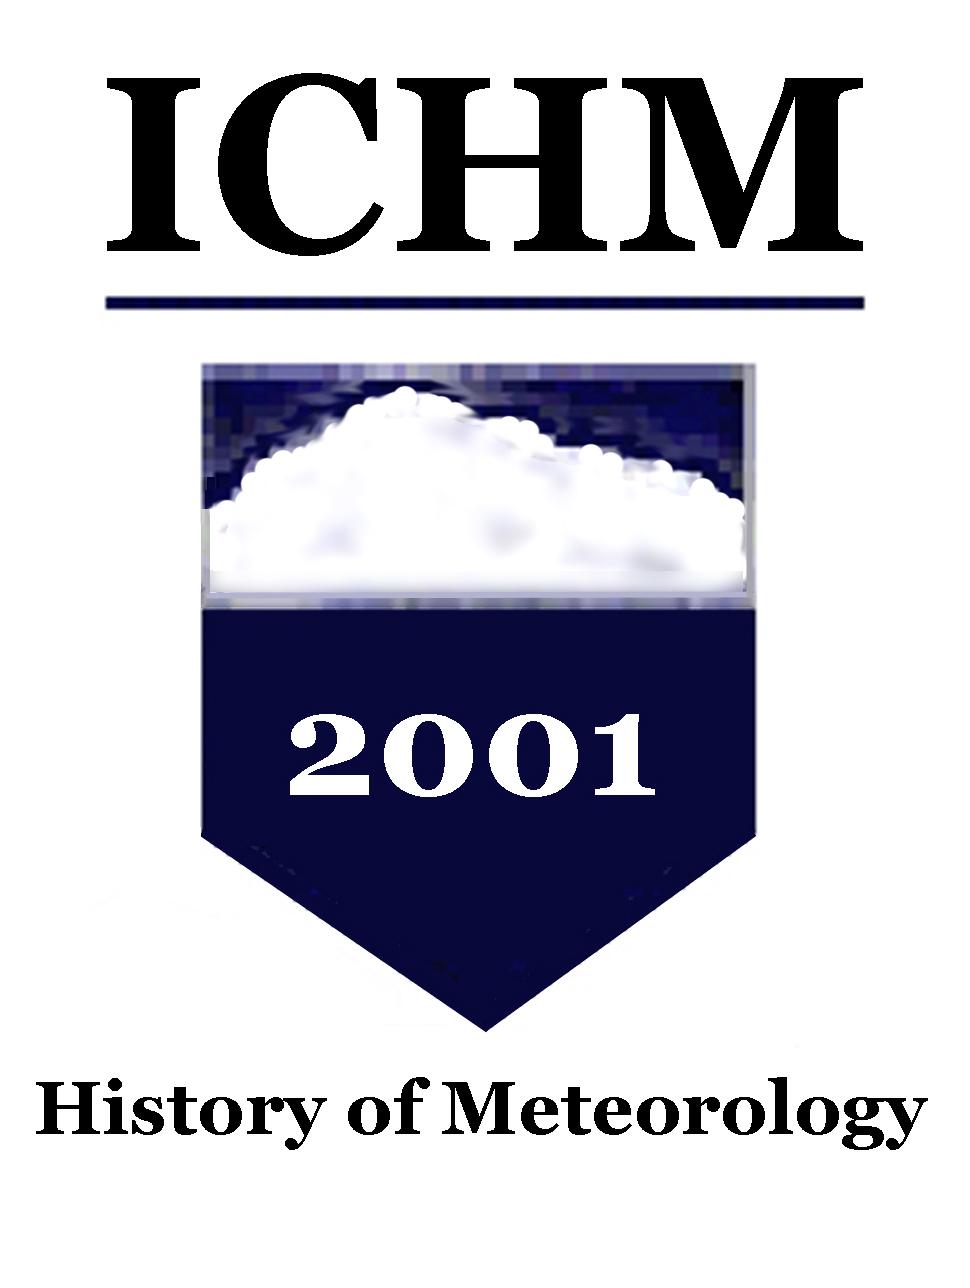 History of Meteorology Volume 8, 2017 Martin Mahony and Angelo Matteo Caglioti Guest Editors James Rodger Fleming Editor-in-Chief History of Meteorology is the peer-reviewed journal of the ICHM.